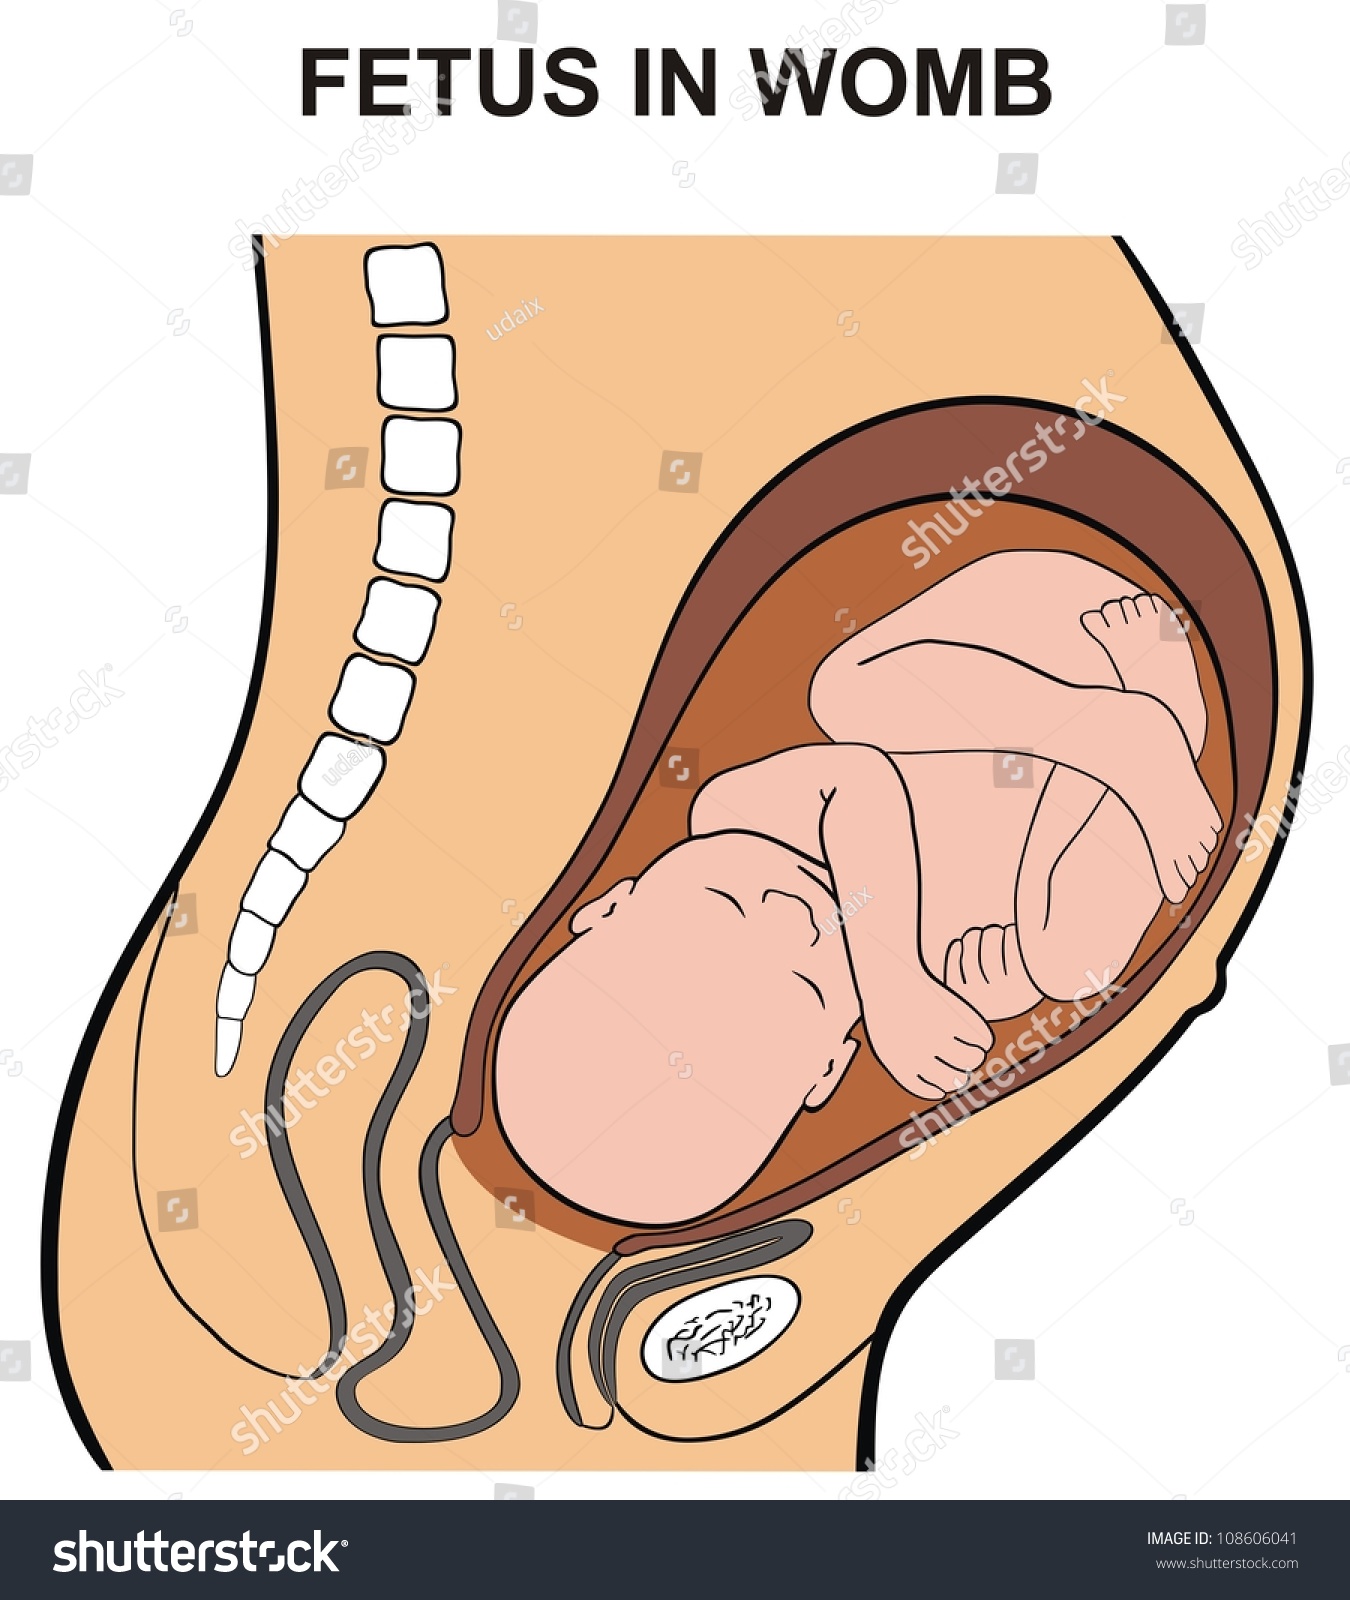 free clipart baby in womb - photo #18